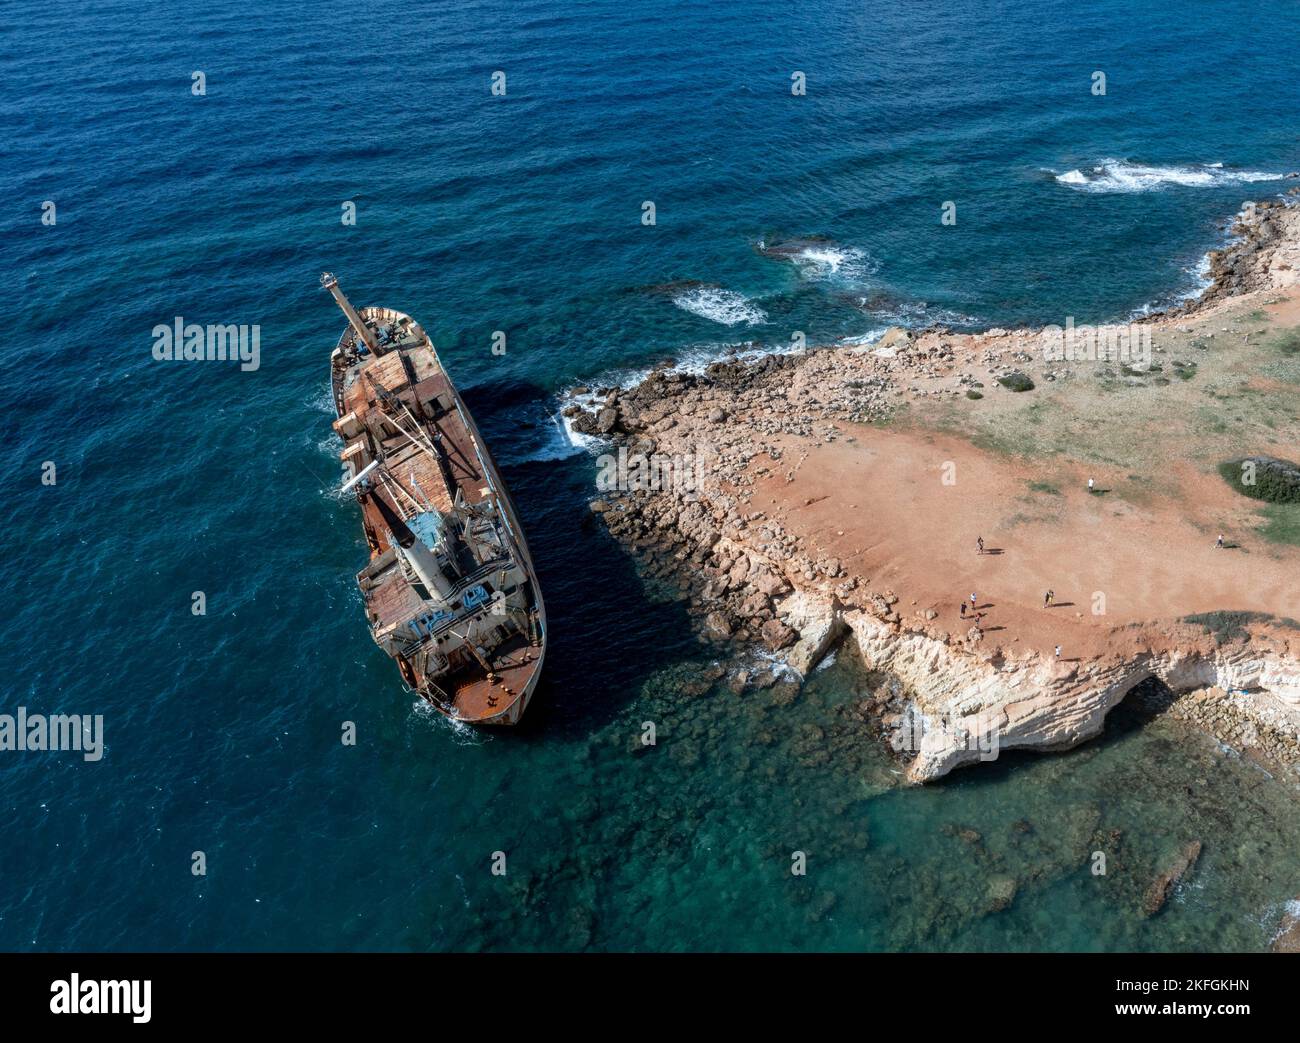 Aerial view of the Edro 111 shipwreck on the rocks near Peyia, Paphos, Cyprus. The ship run aground during a storm in December 2011. Stock Photo